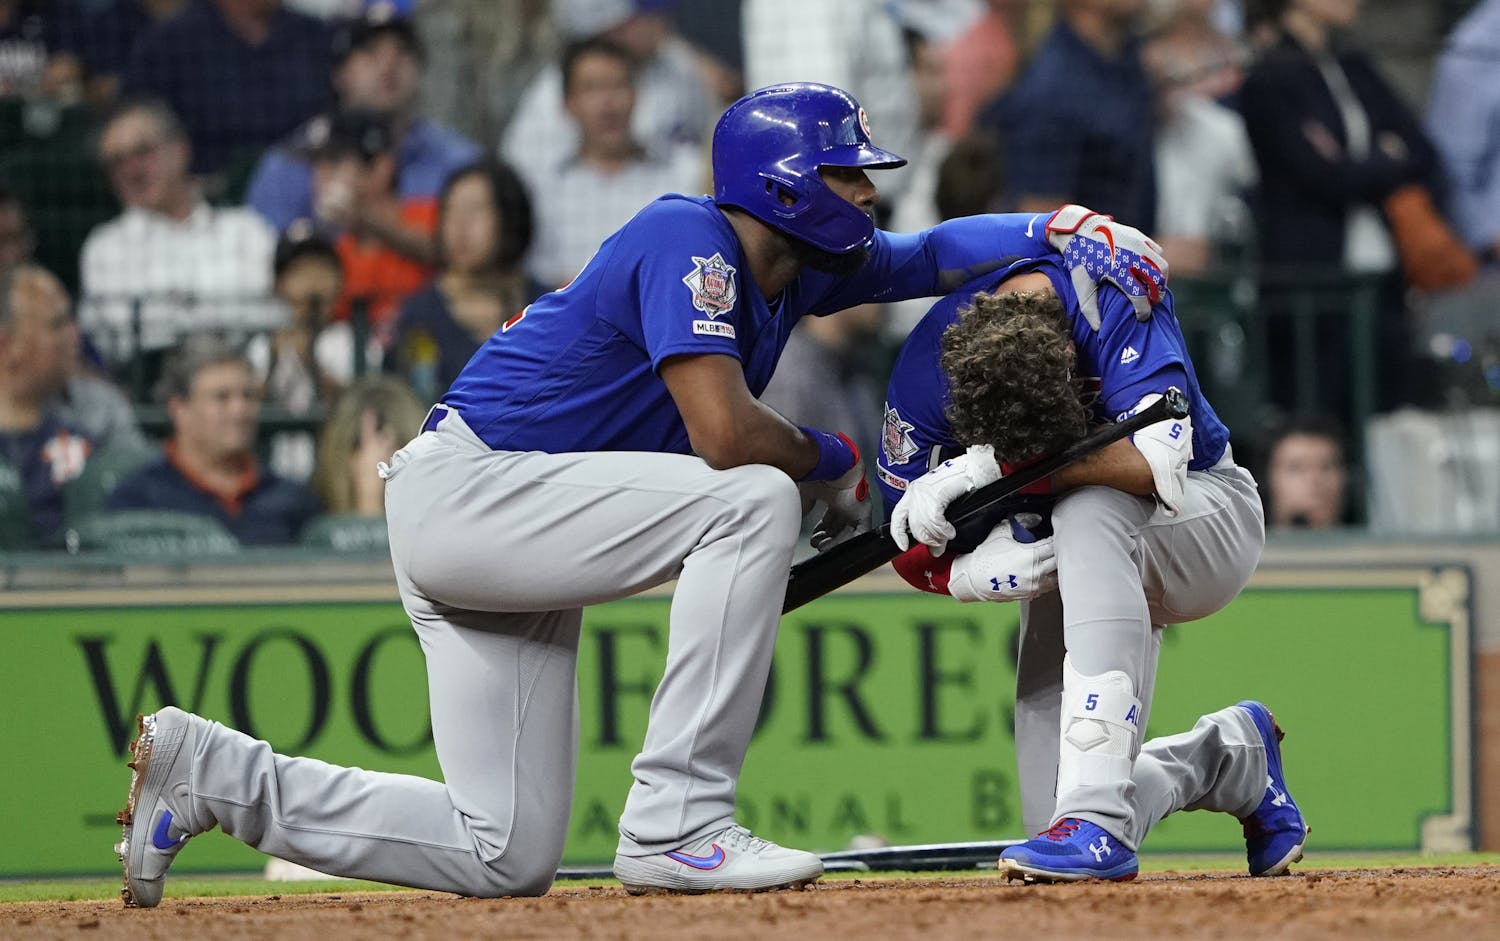 Chicago Cubs' Albert Almora Jr., right, is comforted by Jason Heyward after hitting a foul ball into the stands during the fourth inning of a baseball game against the Houston Astros Wednesday, May 29, 2019, in Houston. (AP Photo/David J. Phillip)  